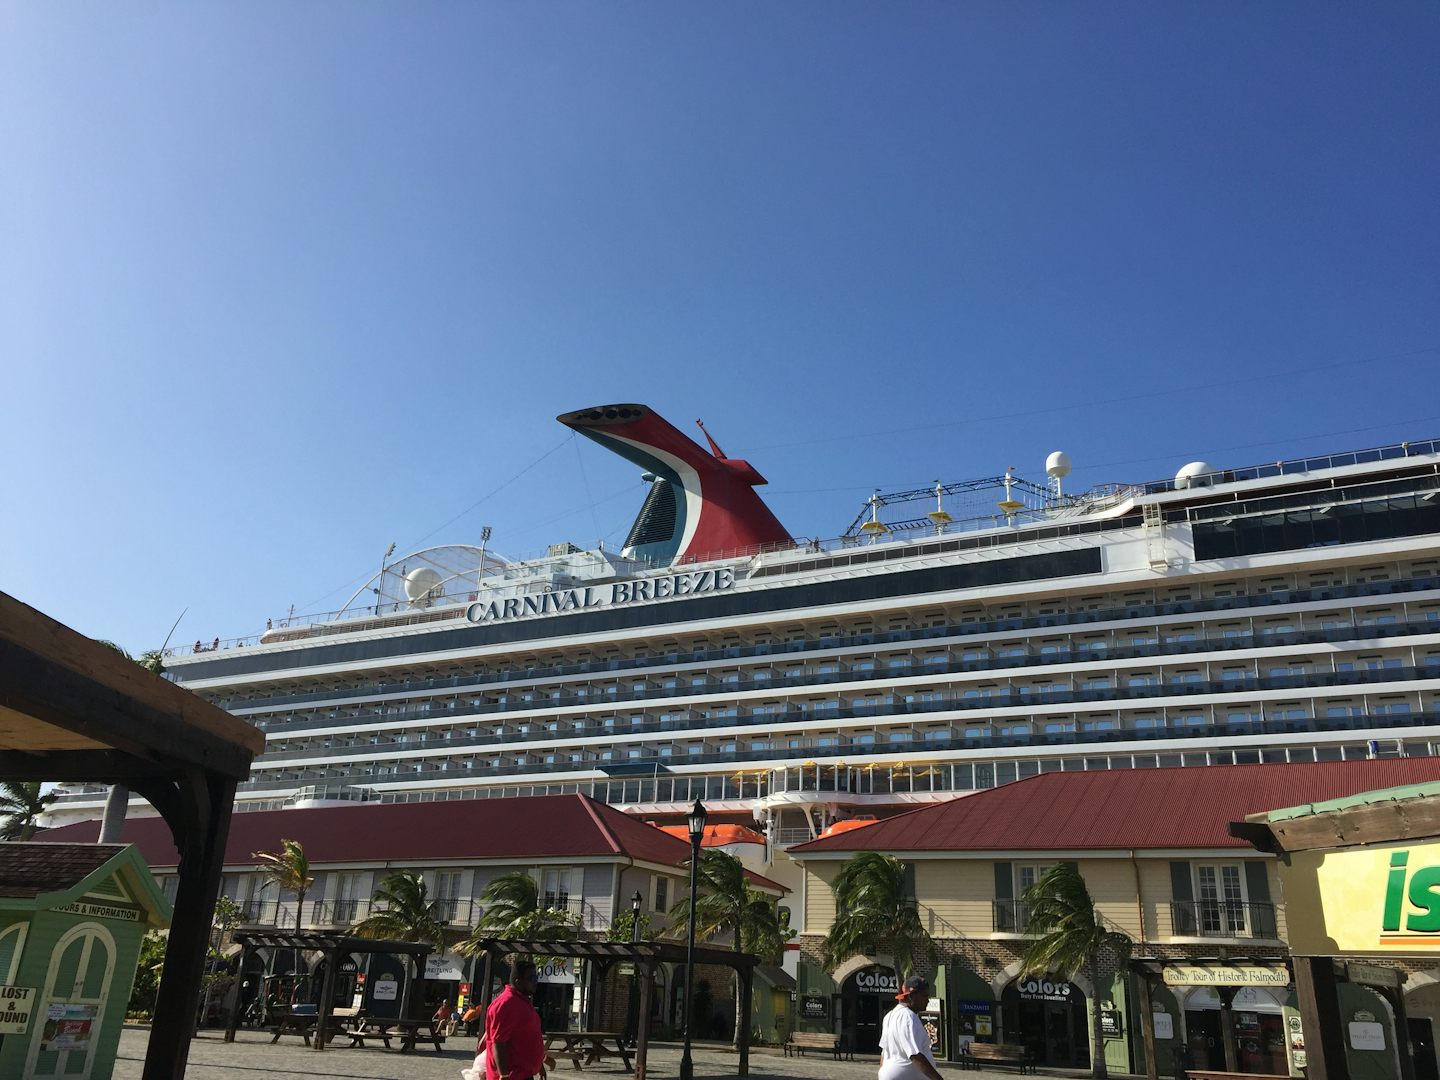 Carnival Breeze docked in Falmouth, Jamaica!